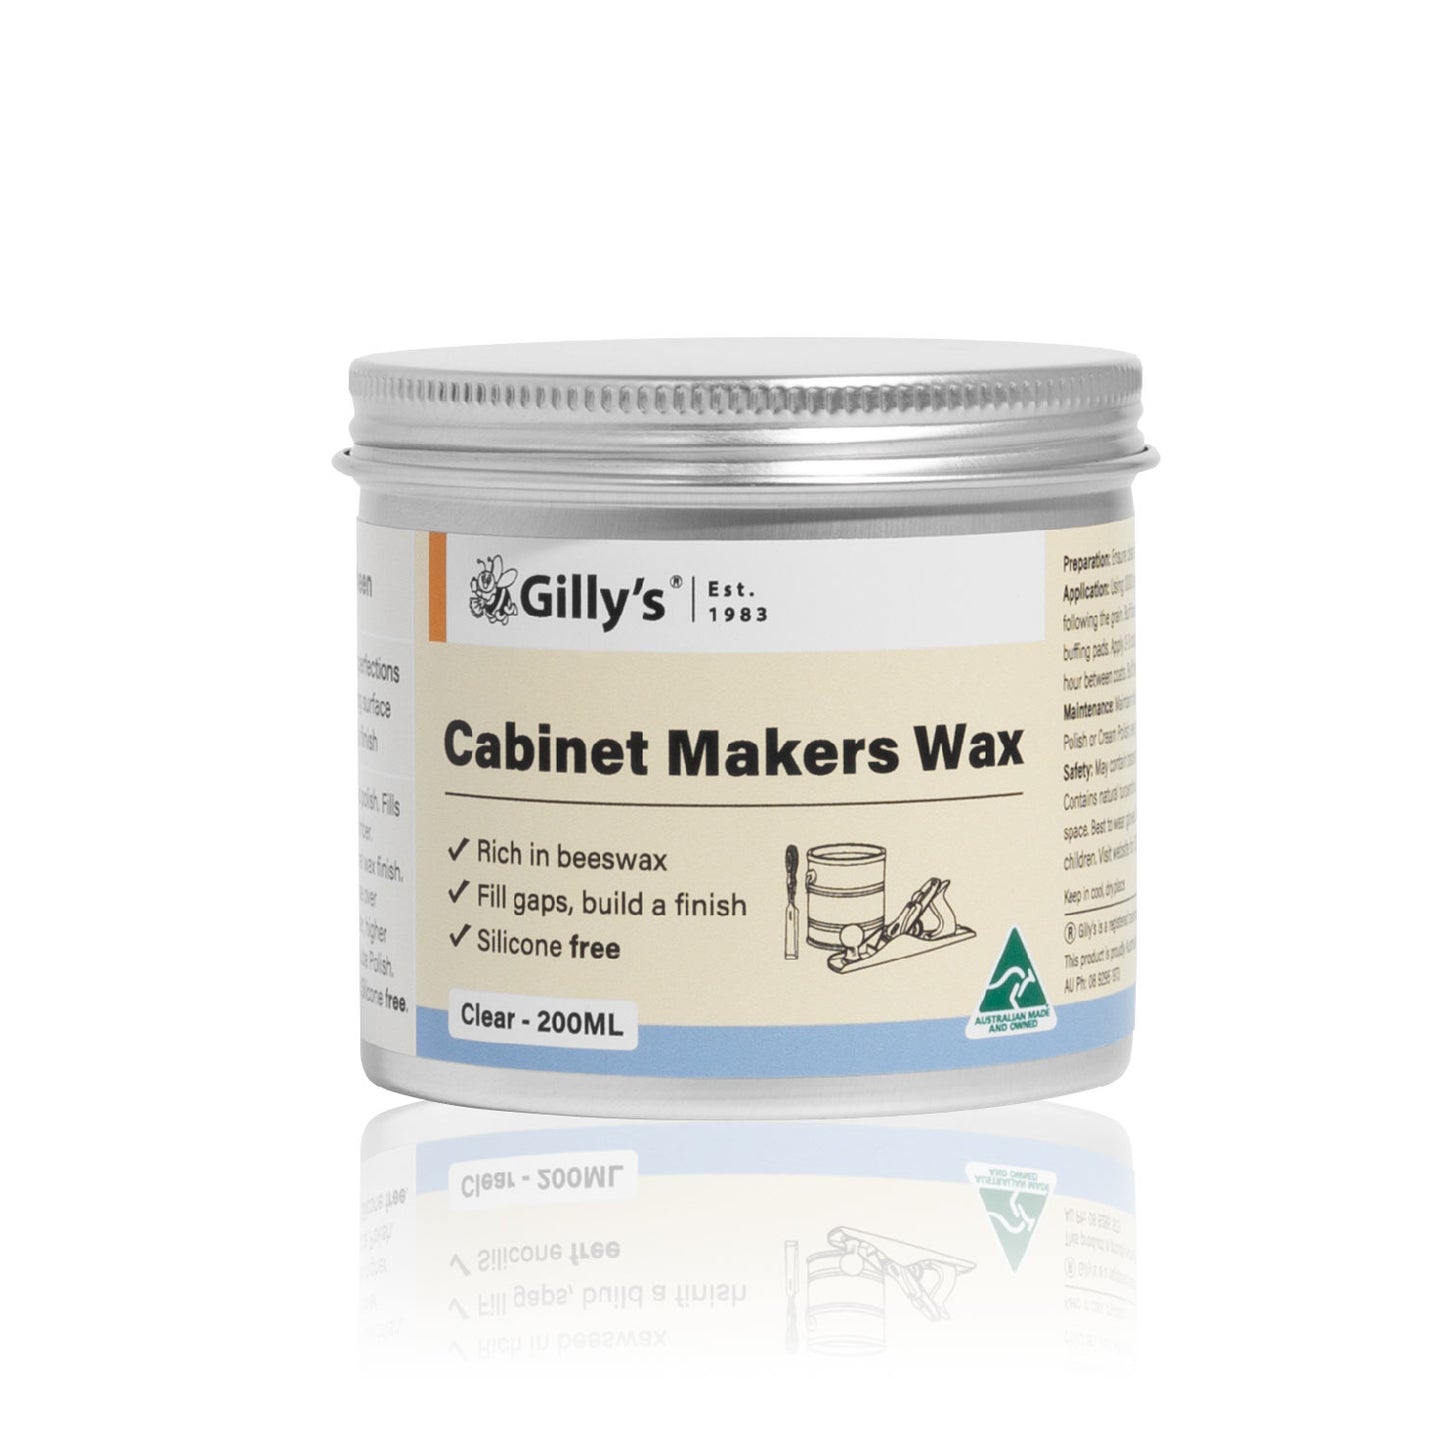 Cabinet Makers Wax